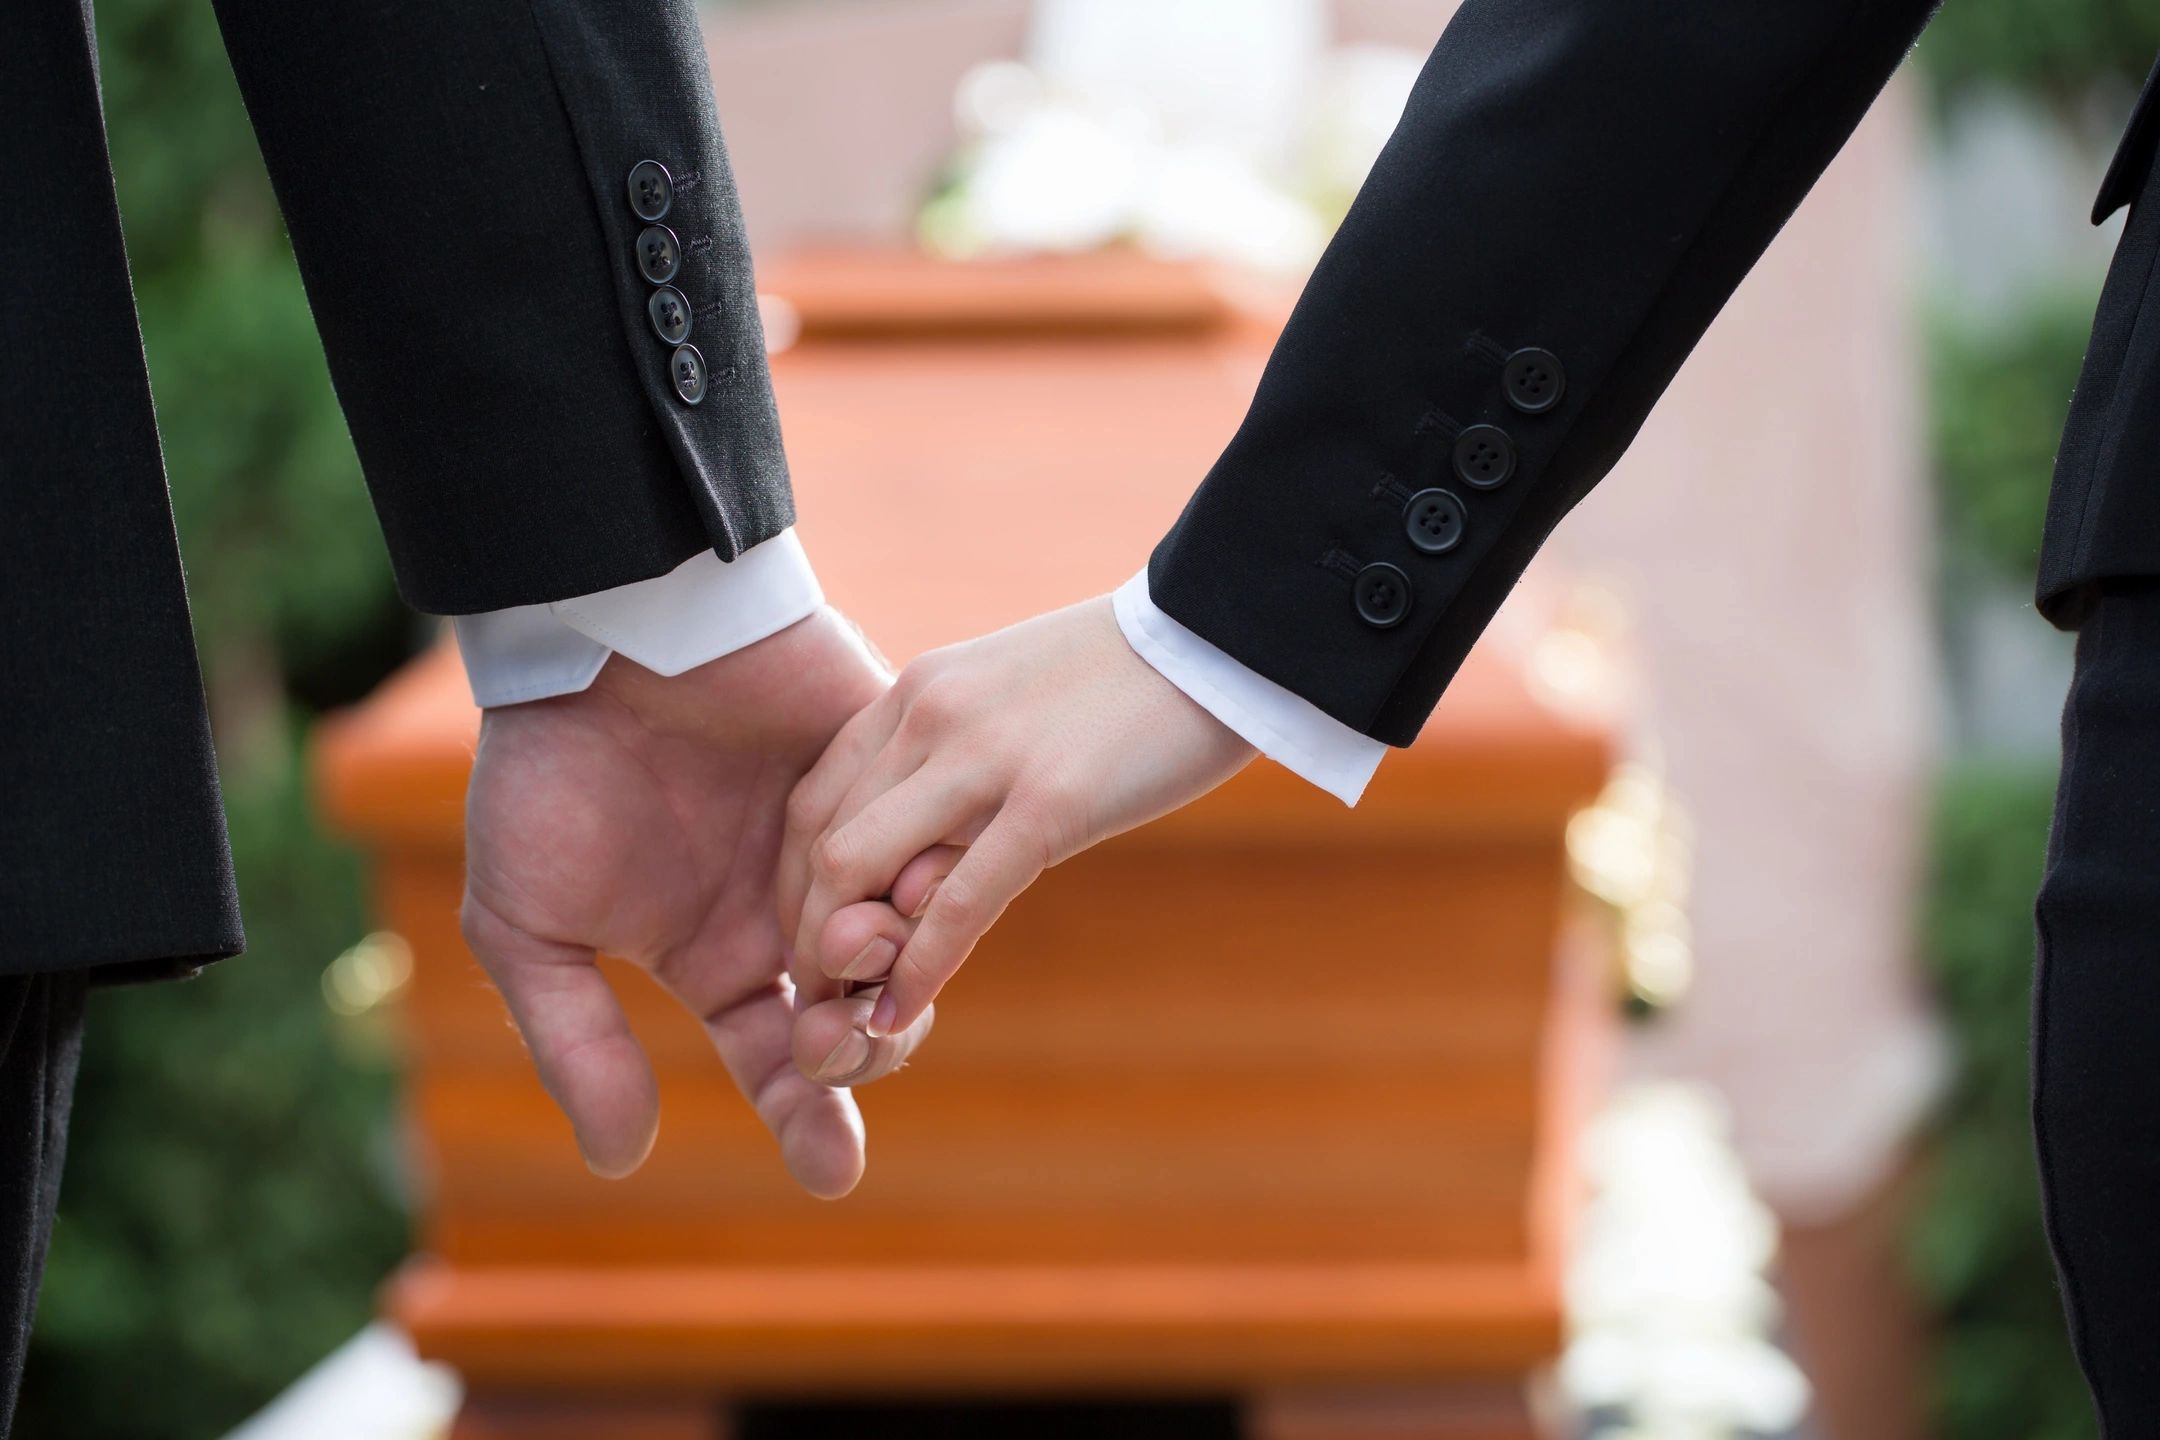 Two people holding hands with a wooden coffin in the background